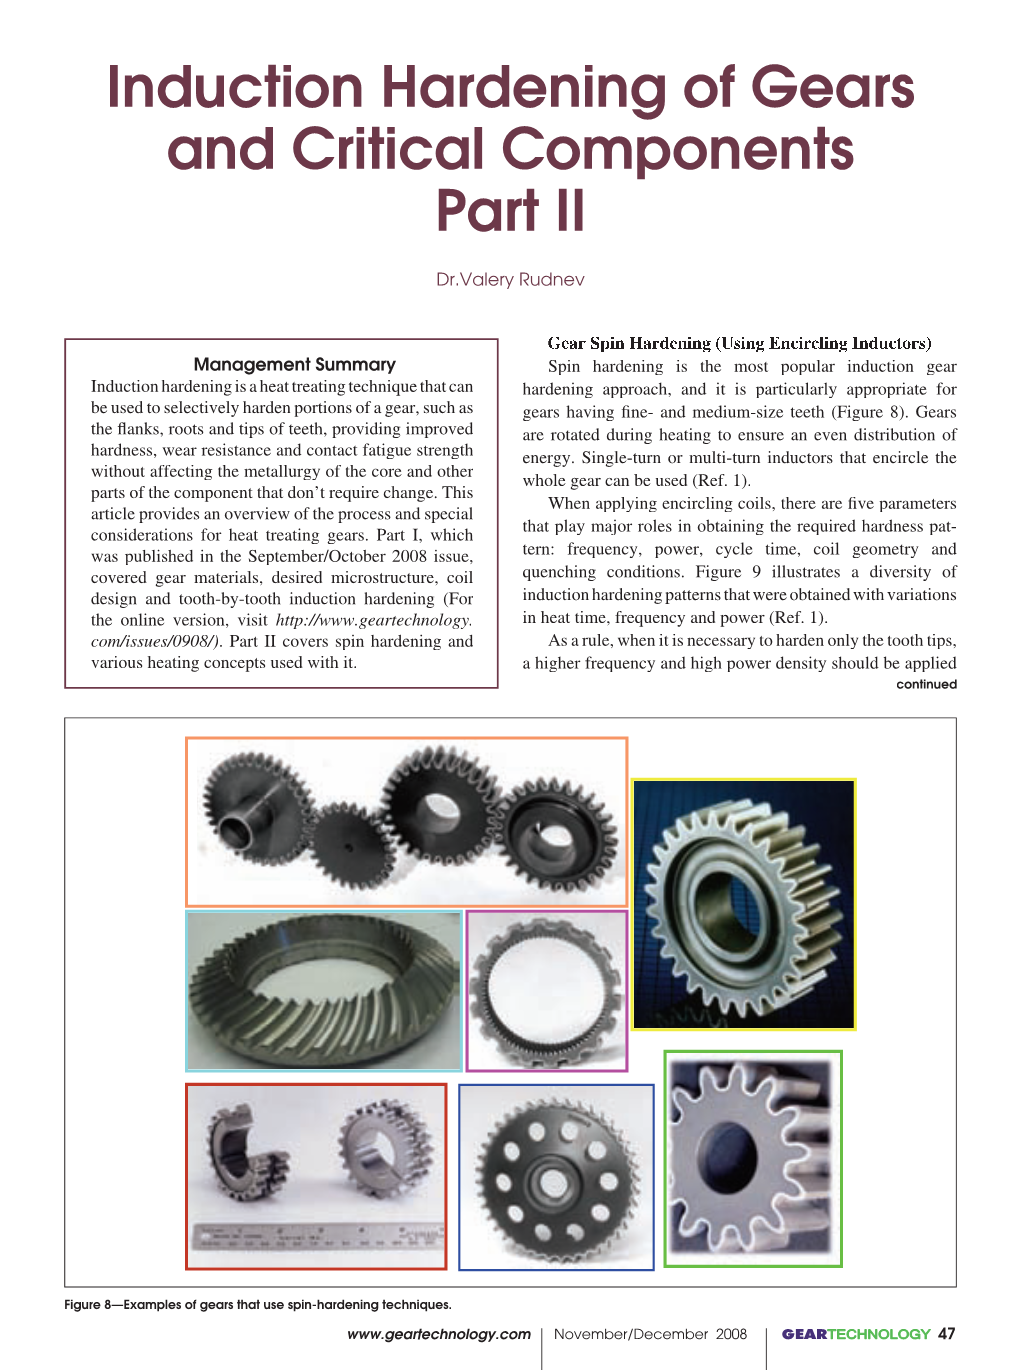 Induction Hardening of Gears and Critical Components Part II